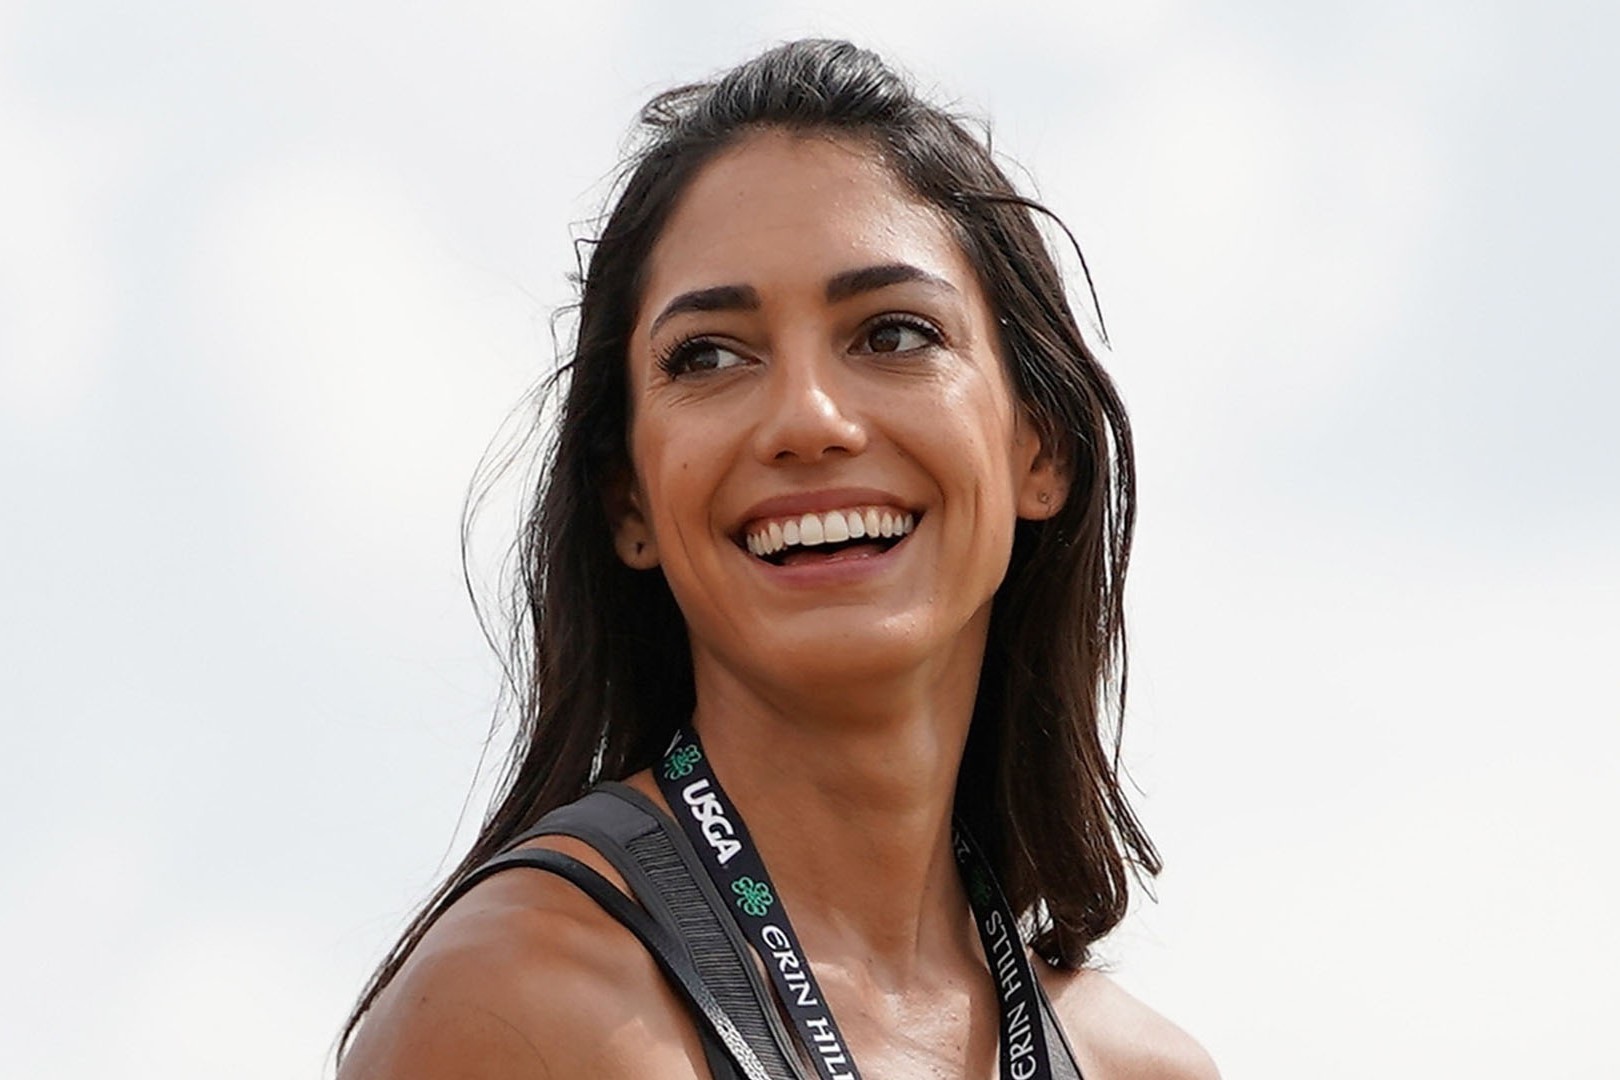 11 Astounding Facts About Allison Stokke - Facts.net